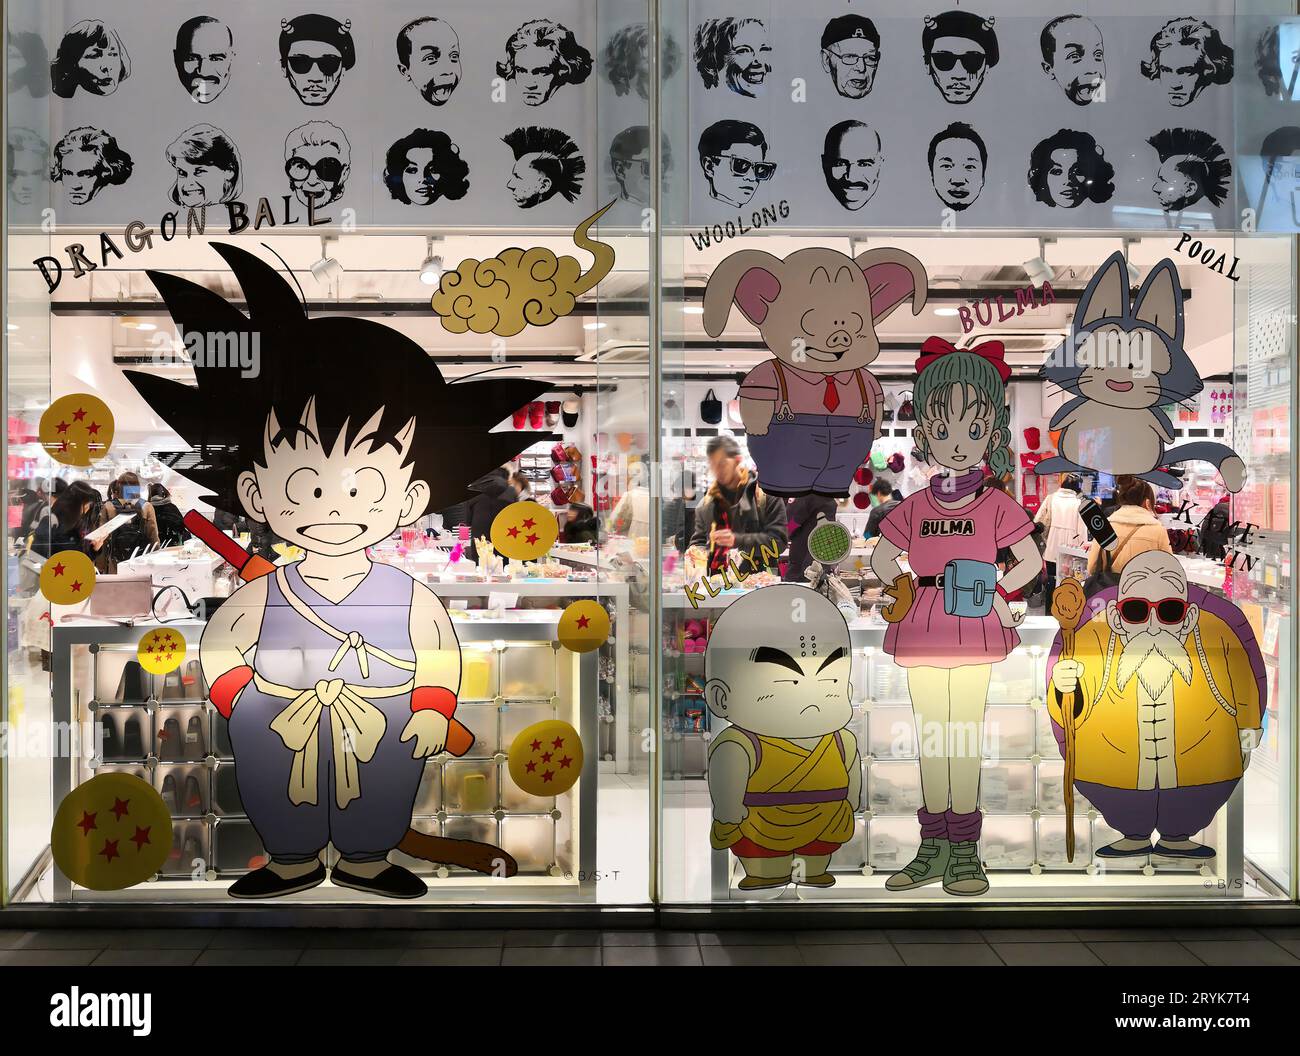 tokyo, japan - dec 15 2018: Storefront of the Japanese Asoko shop in Harajuku wrapped stickers of anime and manga figures from the Dragon Ball Stock Photo